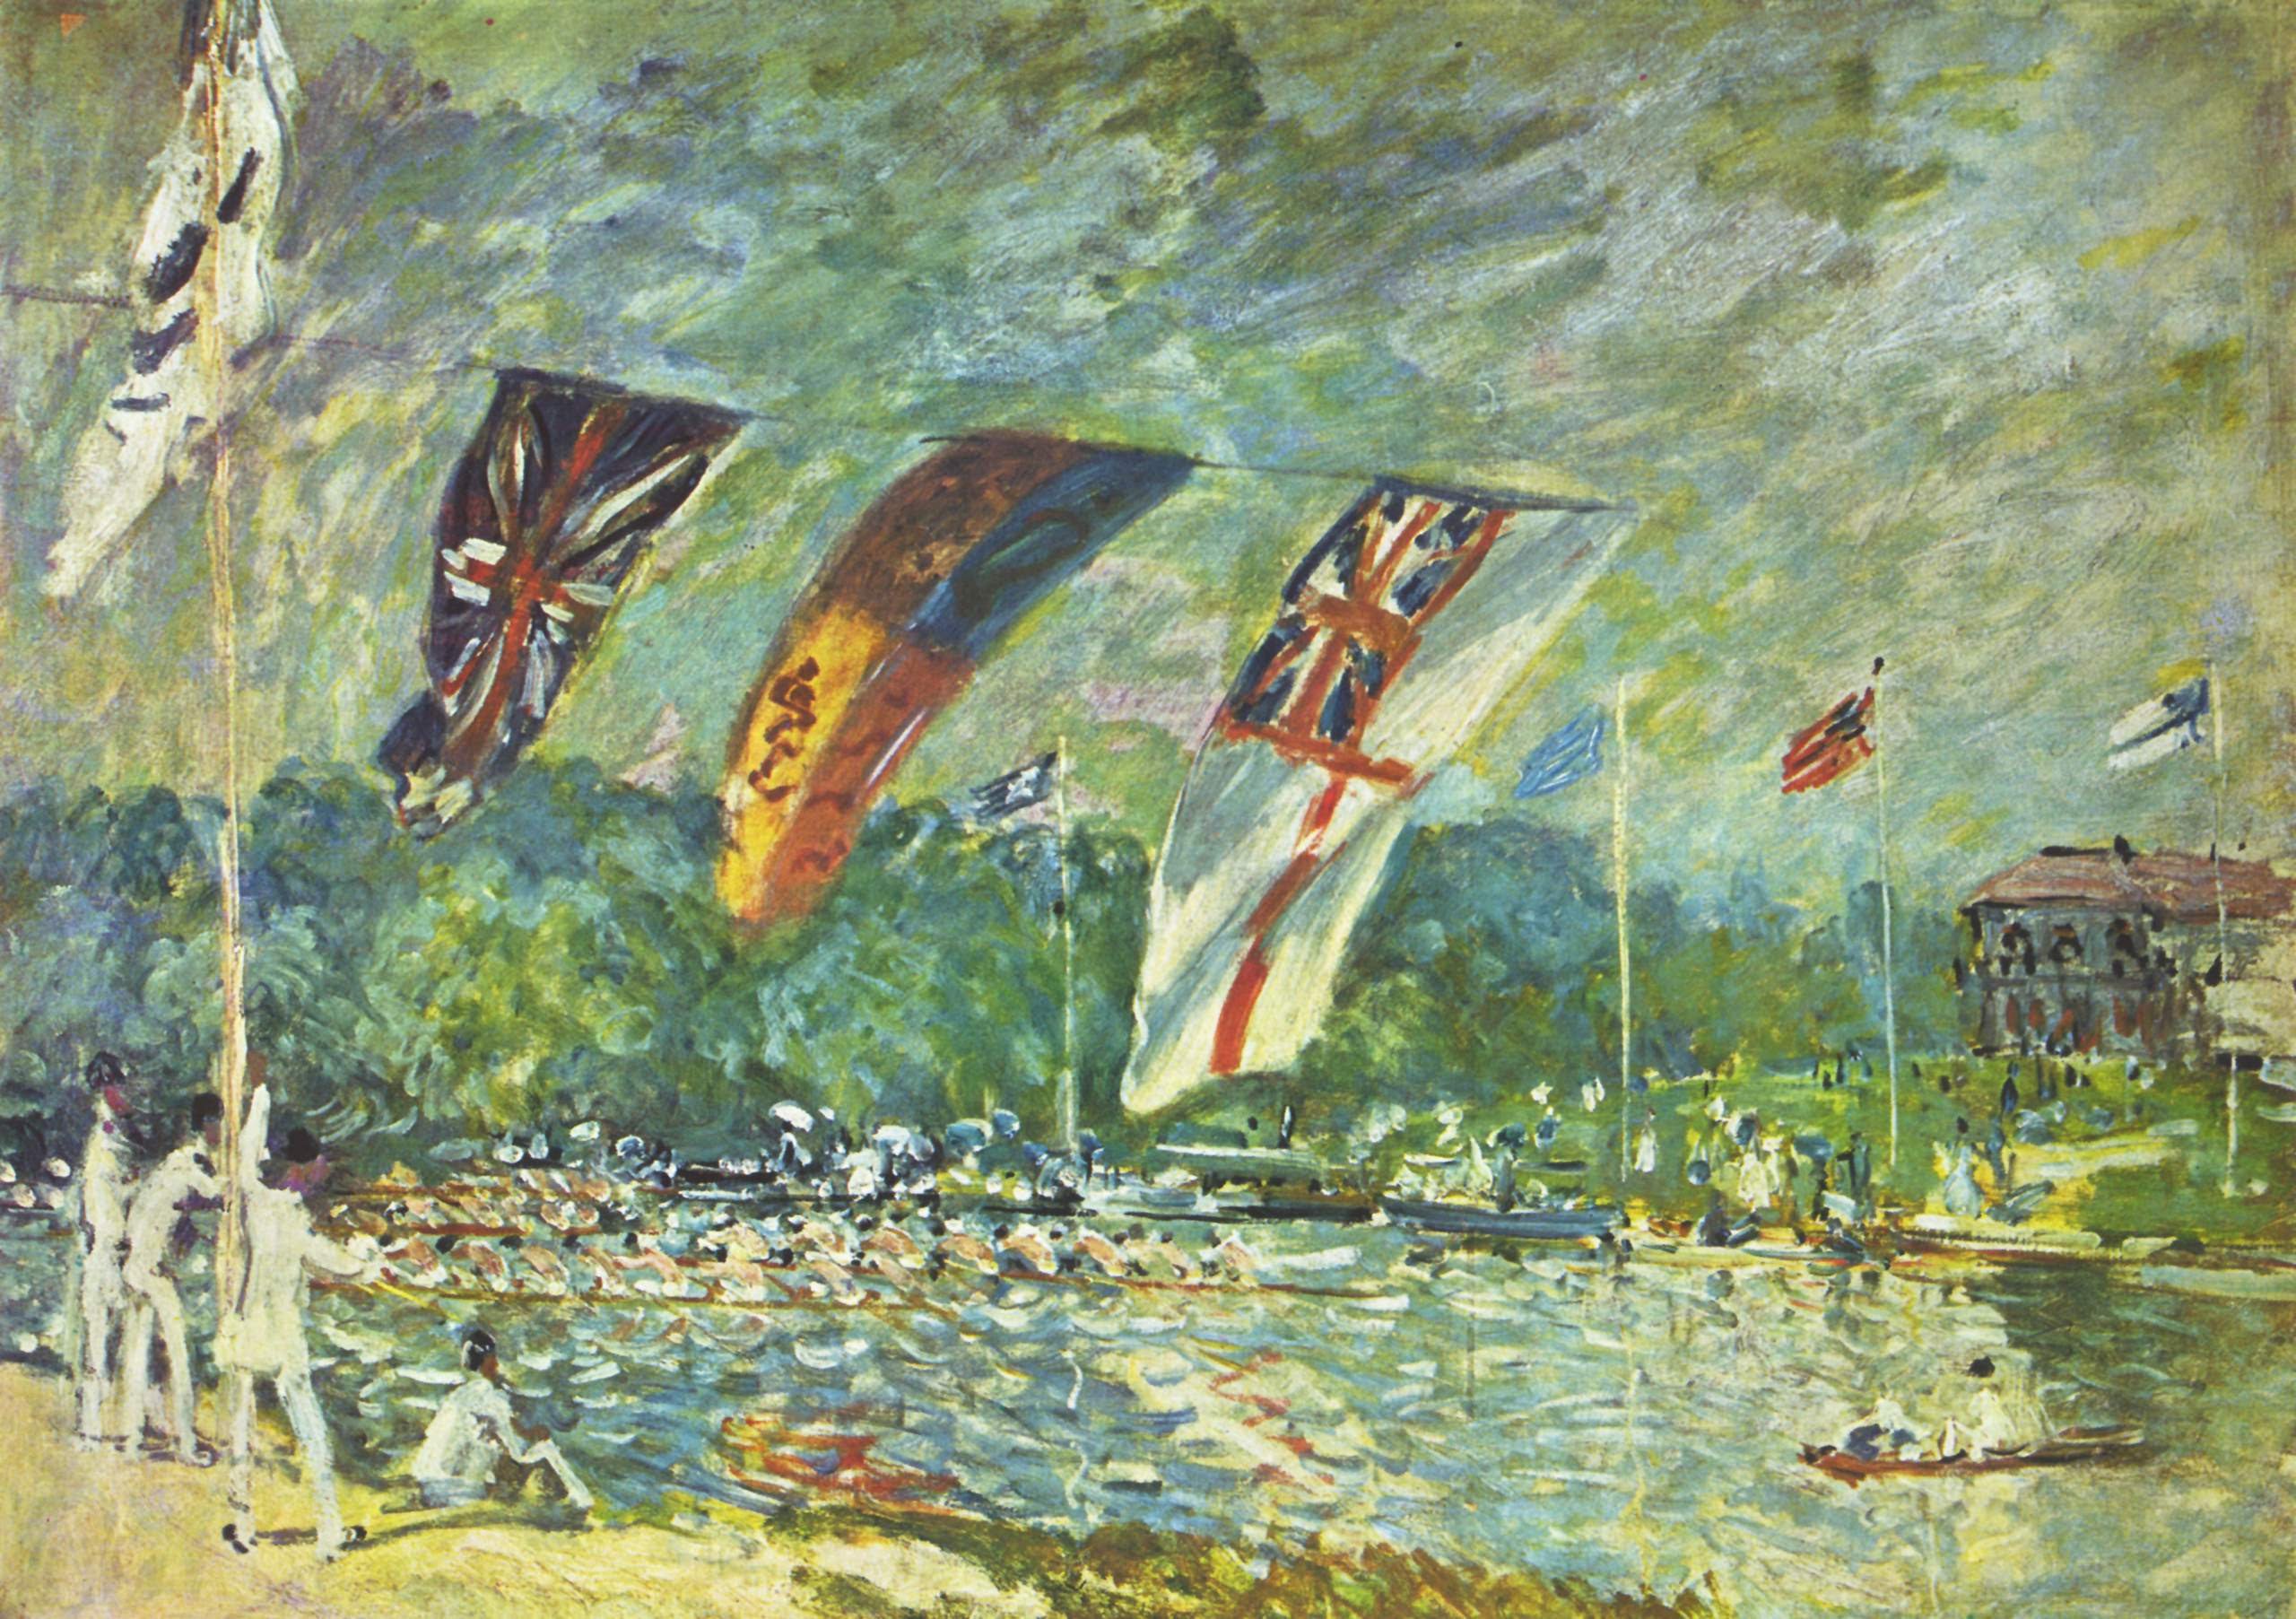 Impressionist painting of a regatta, which is a rowing race, with flags in the foreground. Rowing art by Alfred Sisley